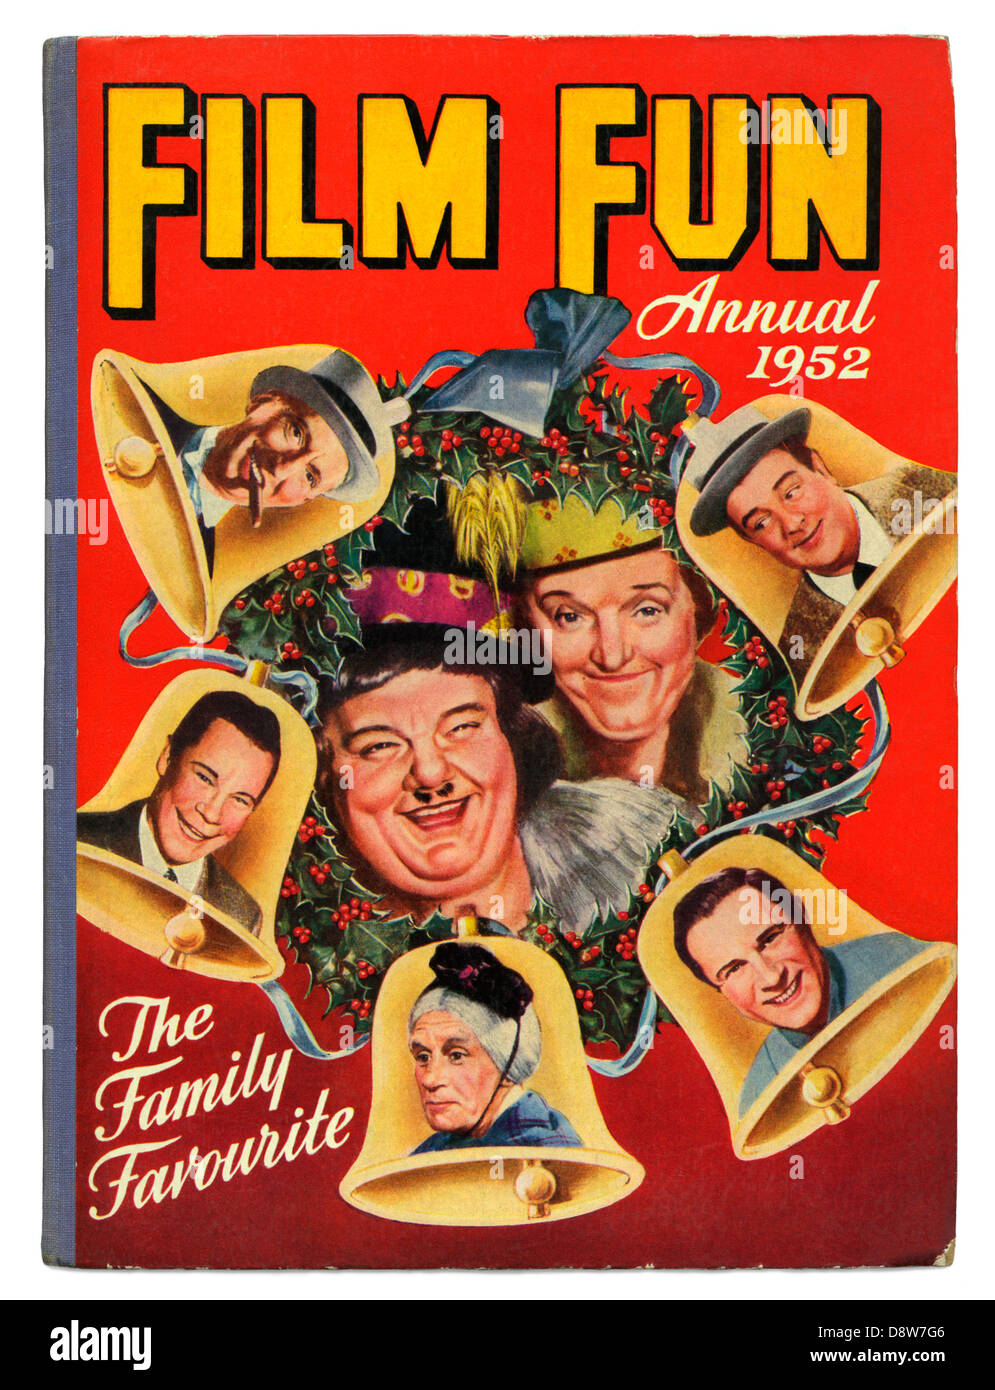 Vintage children's book, Film Fun annual, 1952, featured comedians, TV and movie stars Laurel and Hardy on the cover Stock Photo